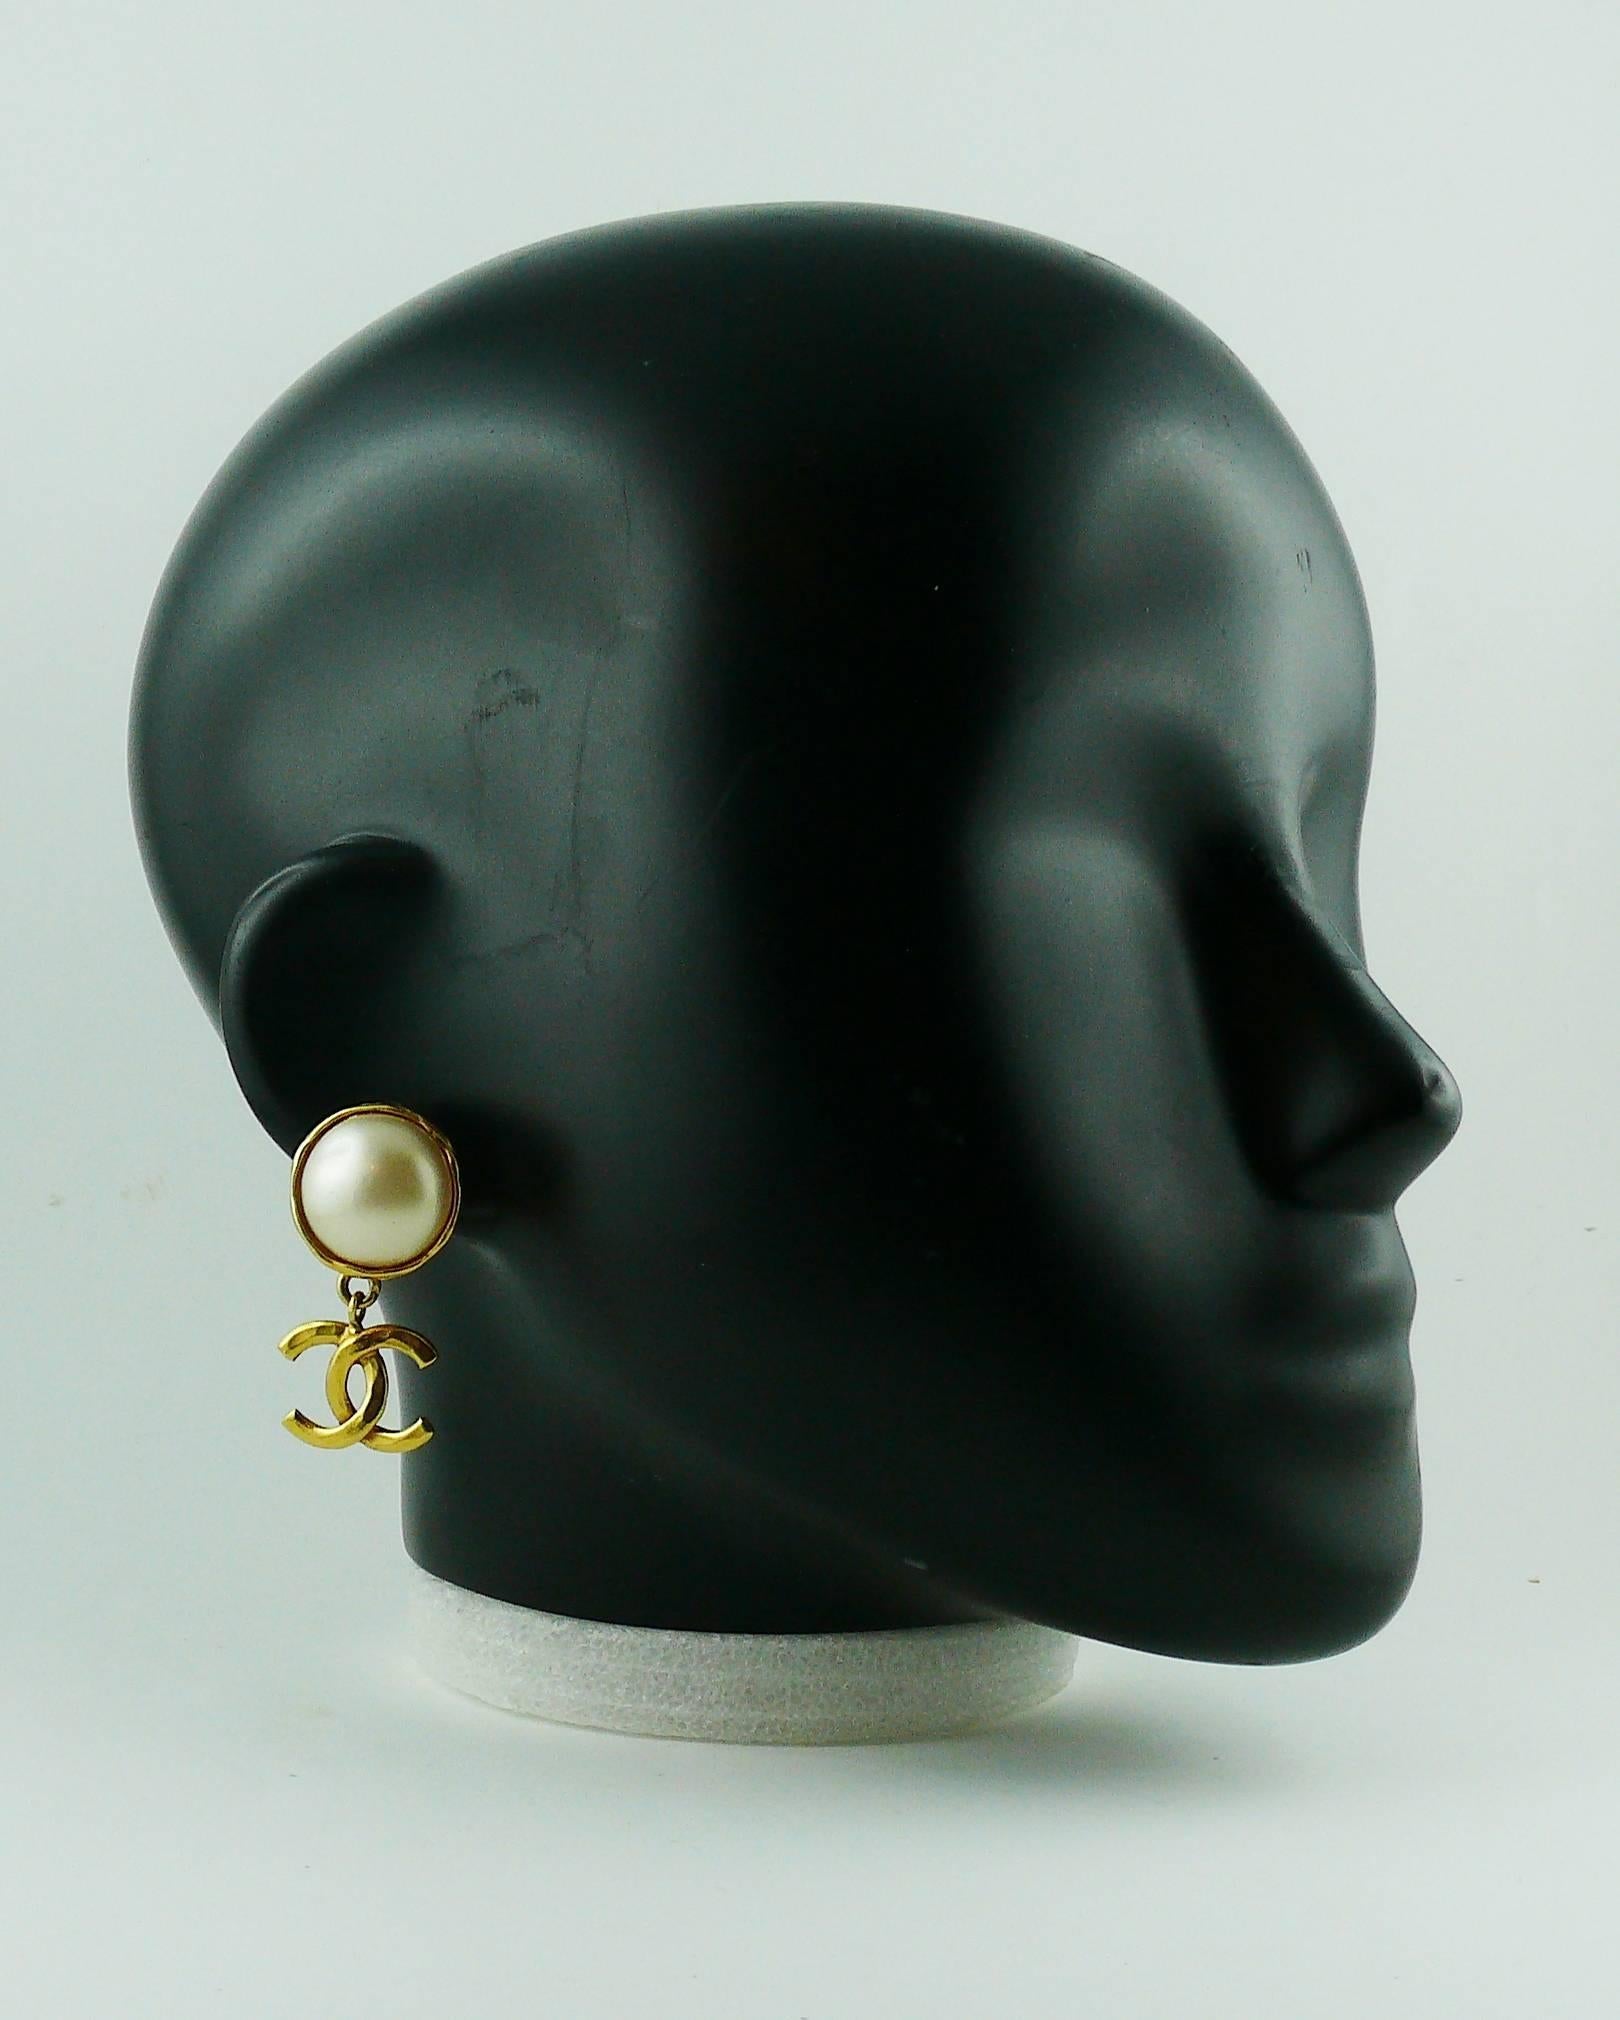 Chanel vintage 1994 faux pearl gold tone logo drop earrings (clip on).

Embossed CHANEL 94 P Made in France.

Spring 1994 Collection.

Indicative measurements : height approx. 4.4 cm (1.73 inches) / max. width approx. 2 cm (0.79 inch).

Comes with a